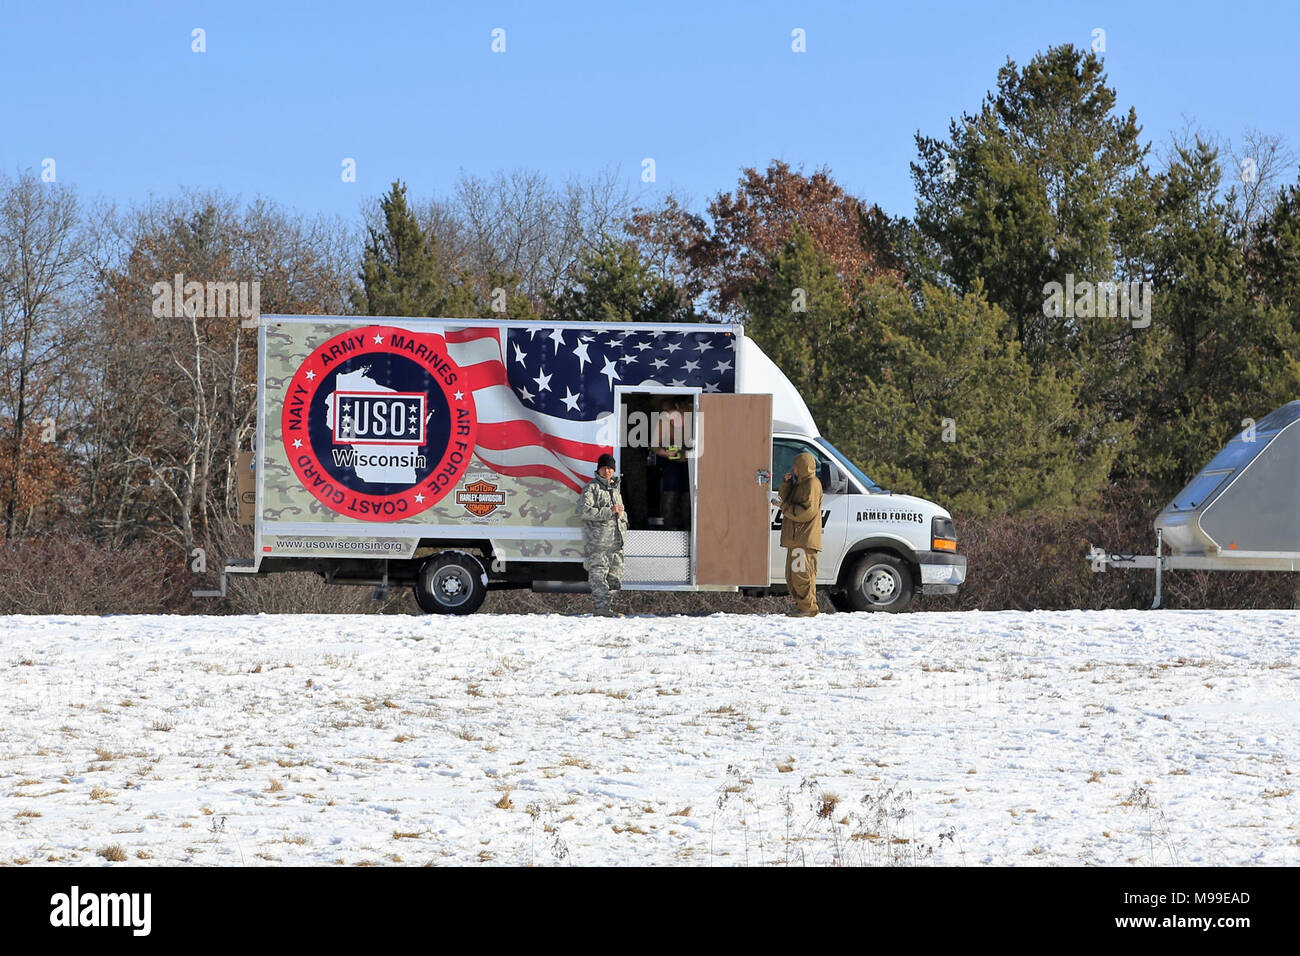 Service members at Fort McCoy, Wis., for training visit a mobile USO Wisconsin station/truck Feb. 14, 2018, on South Post at the installation. USO Wisconsin Inc. is a 501(c)(3) nonprofit organization. It currently operates six centers in Wisconsin that serve more than 25,000 military Families throughout the state. The USO has had a continuous presence in Wisconsin since 1943 through the global parent company, USO Inc. The truck is a recent new addition to USO support at the installation. (U.S. Army Stock Photo